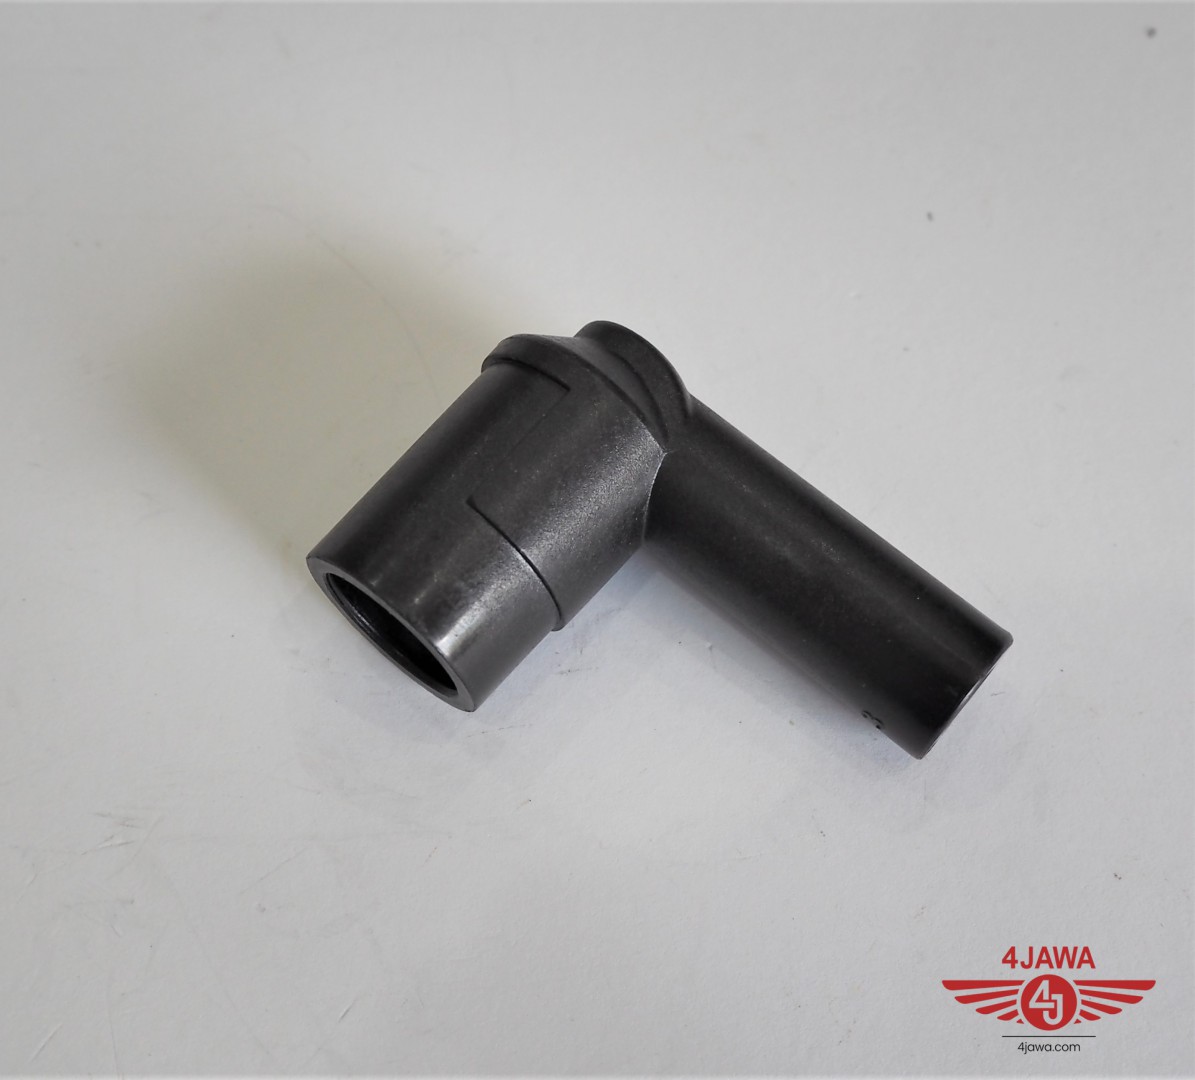 JAWA/CZ 125,175,250,350 CONNECTOR NEW SPARKPLUG RUBBER TYPE WATERPROOF 